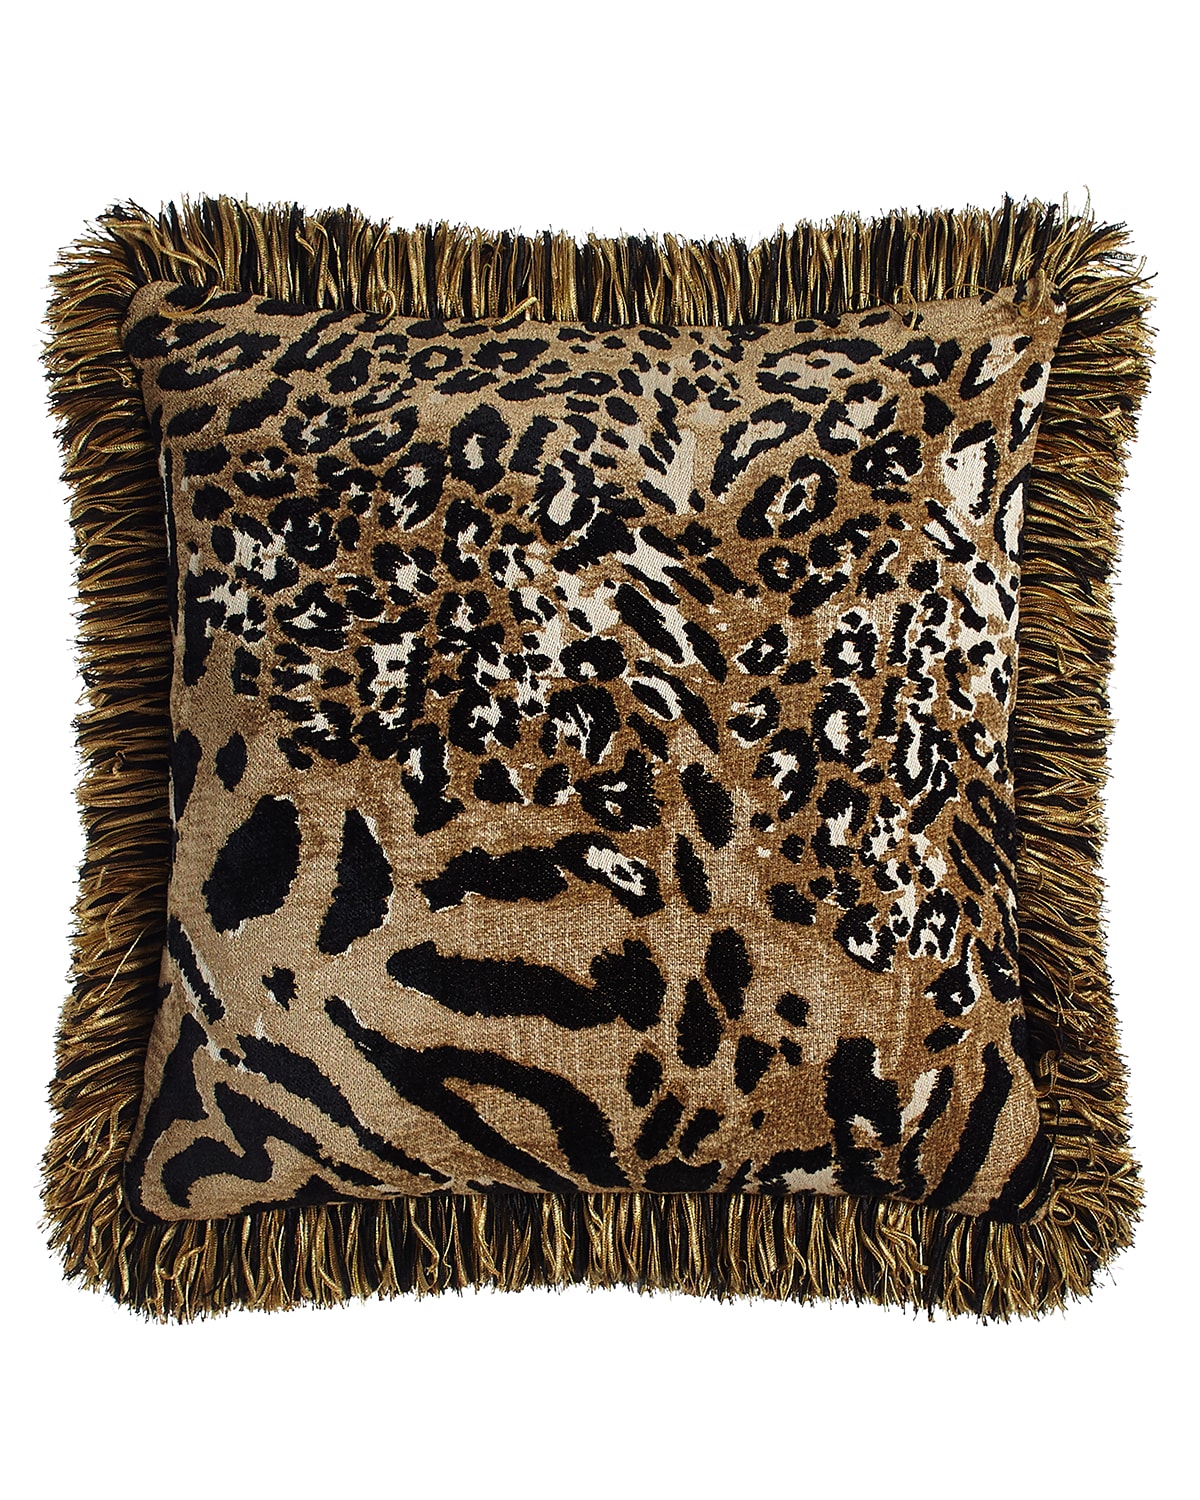 Image Sweet Dreams Reversible Madagascar Pillow with Fringe, 18"Sq.